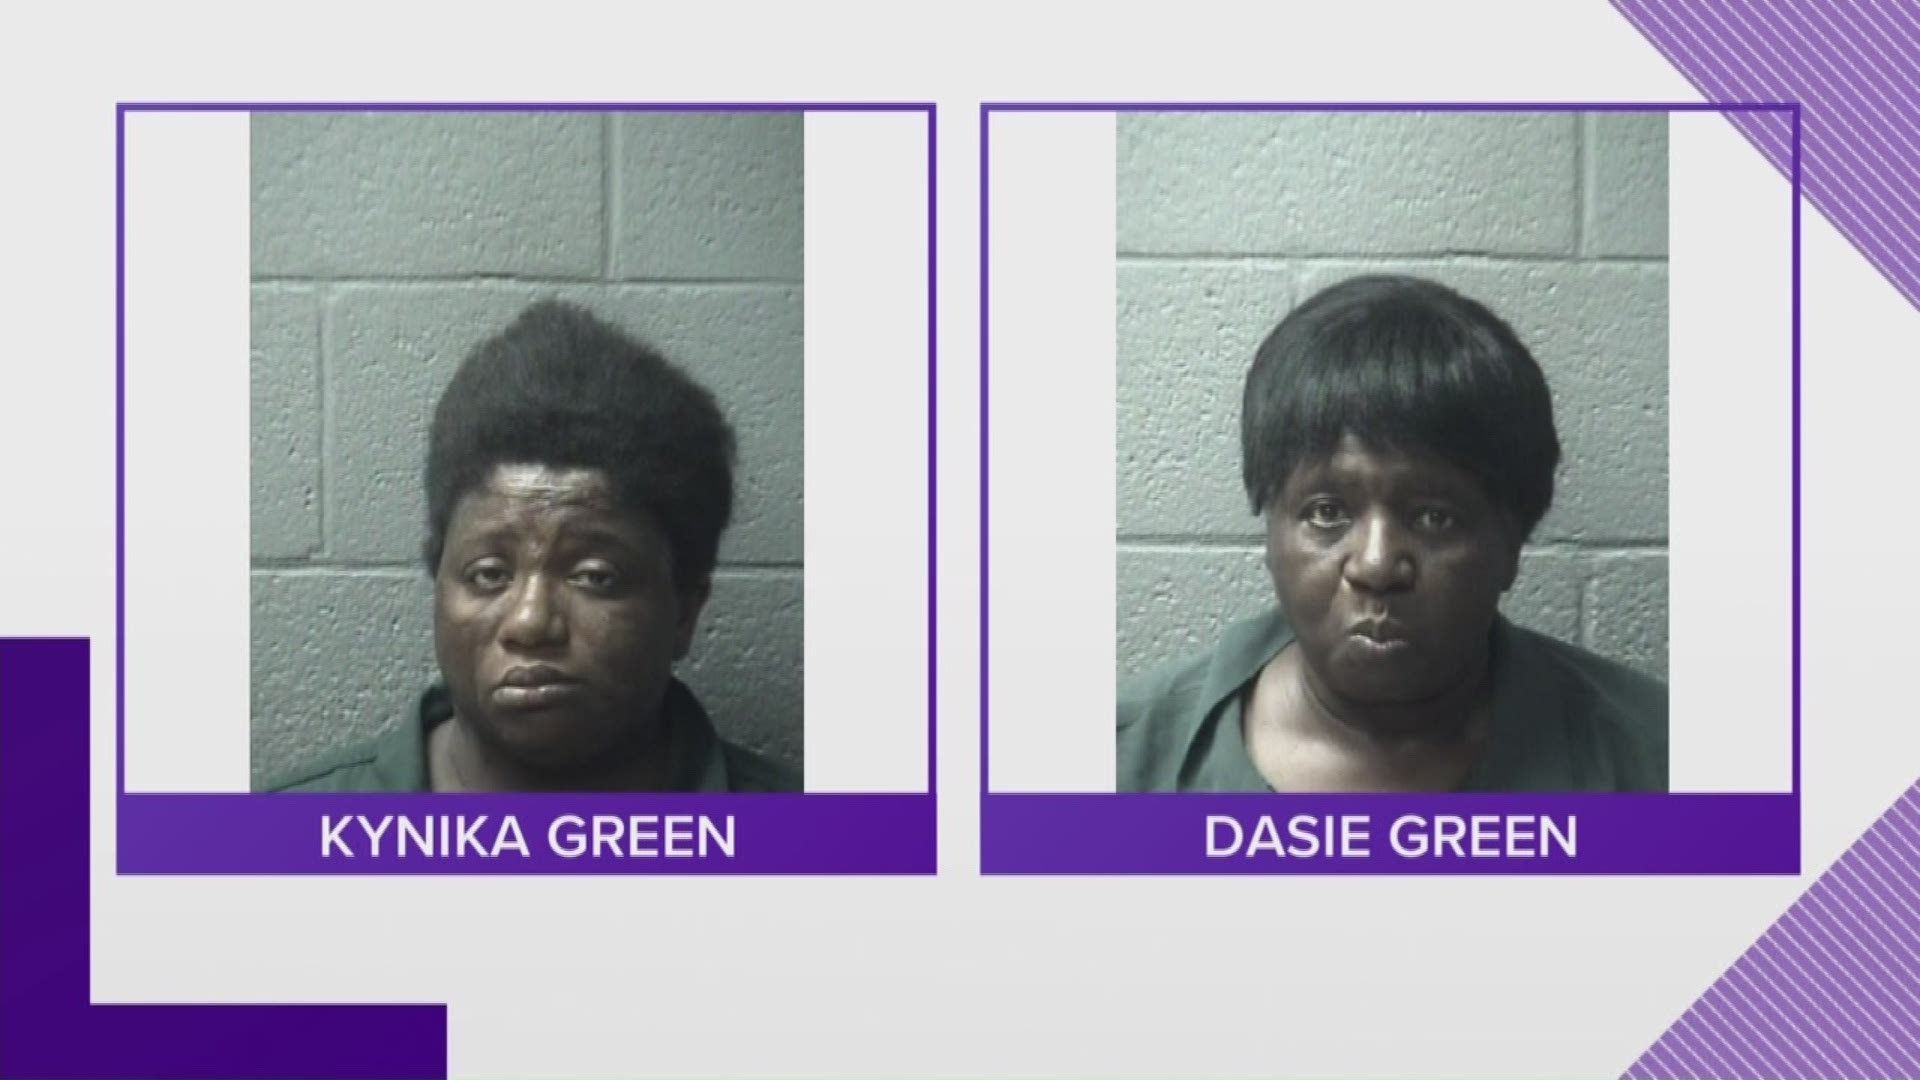 Kynika Green, 32 is charged with murder in the death of her daughter and Dasie Green, 64 is charged with unlawful neglect of a child